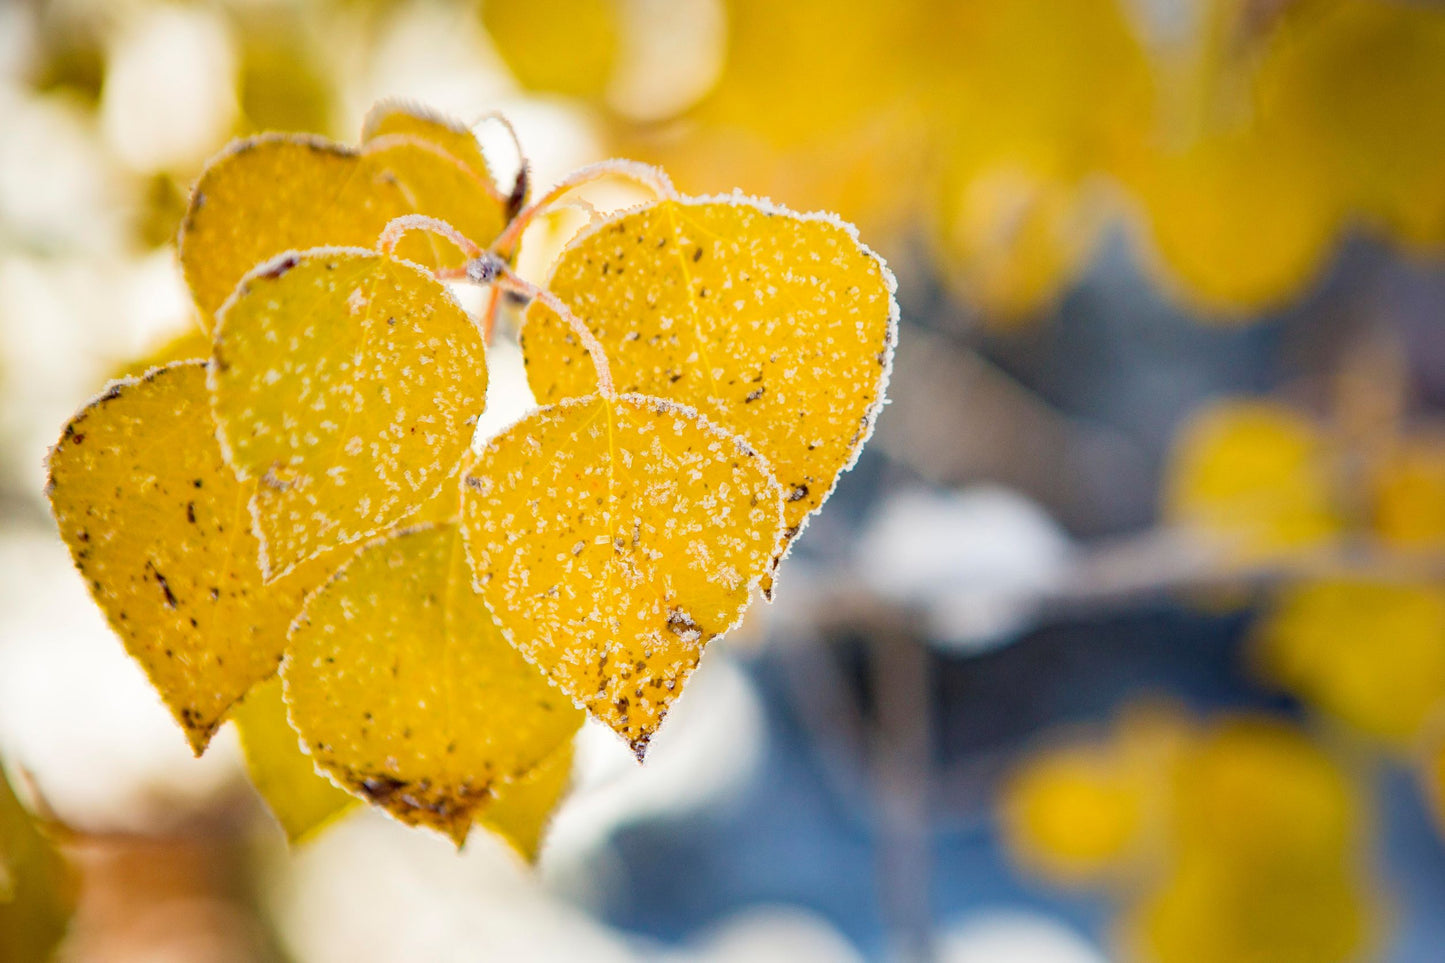 " Aspen Fall Frost " Small Canvas Photographer: Kyle Spradley Small Canvas Print  Aspen Leaves in Fall color with fresh frost  Taken in the Snowy Range Mountains of Wyoming  12" length x 9" height x 1" width  Sawtooth for hanging